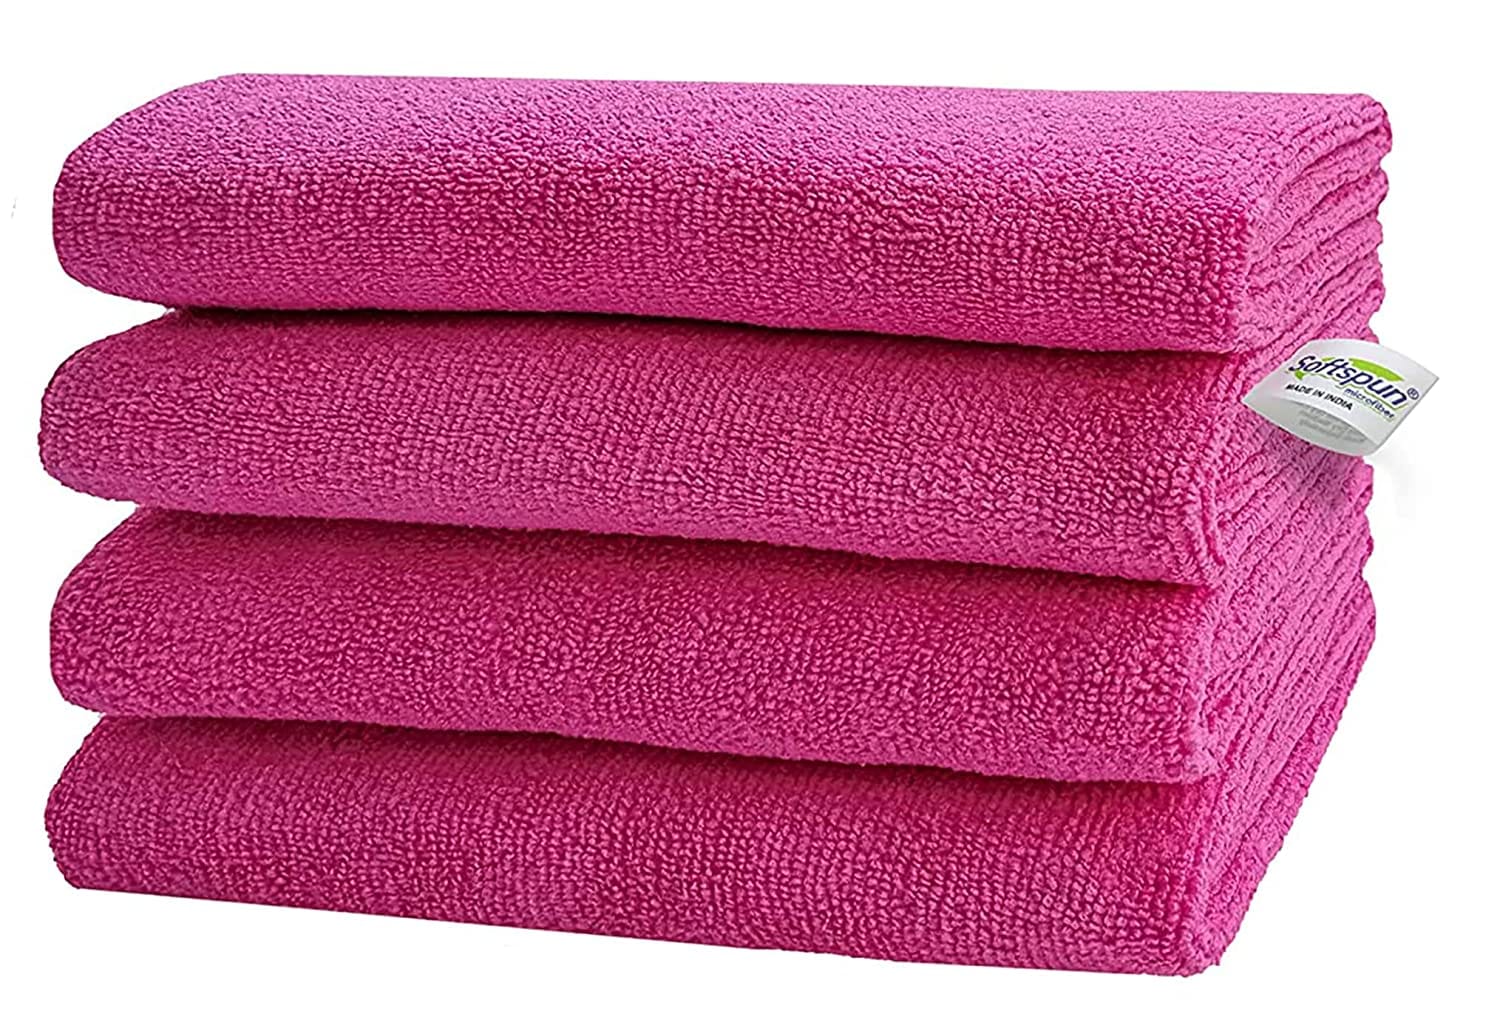 SOFTSPUN Microfiber Baby Hand & Face Wipes Towel 30x30cm 340 GSM Super Soft & Silky for Hand, Face and Body - Hypoallergenic Sensitive Skin Wipes & Washcloths.